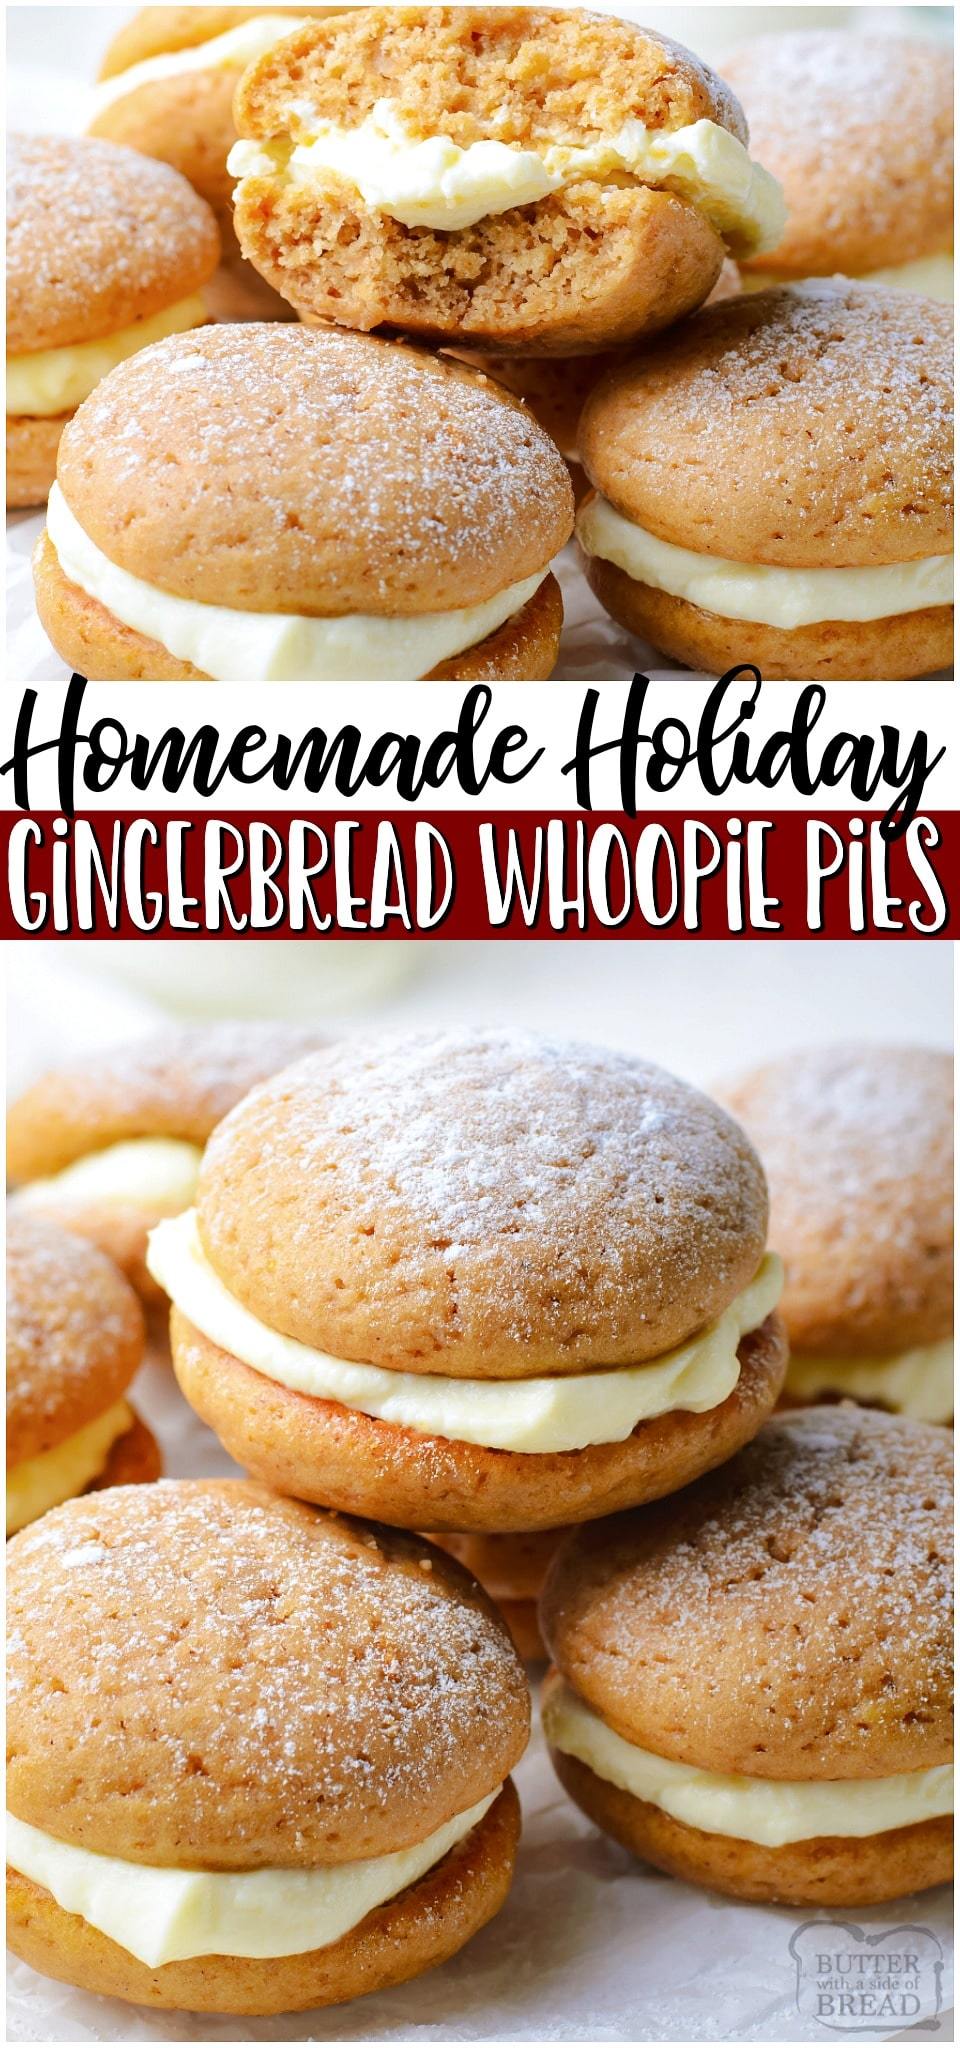 Gingerbread whoopie pies are soft, spiced gingerbread cookies with a lovely cream cheese filling. Perfect gingerbread treat for the holidays! #gingerbread #whoopiepie #dessert #holiday #baking #easyrecipe